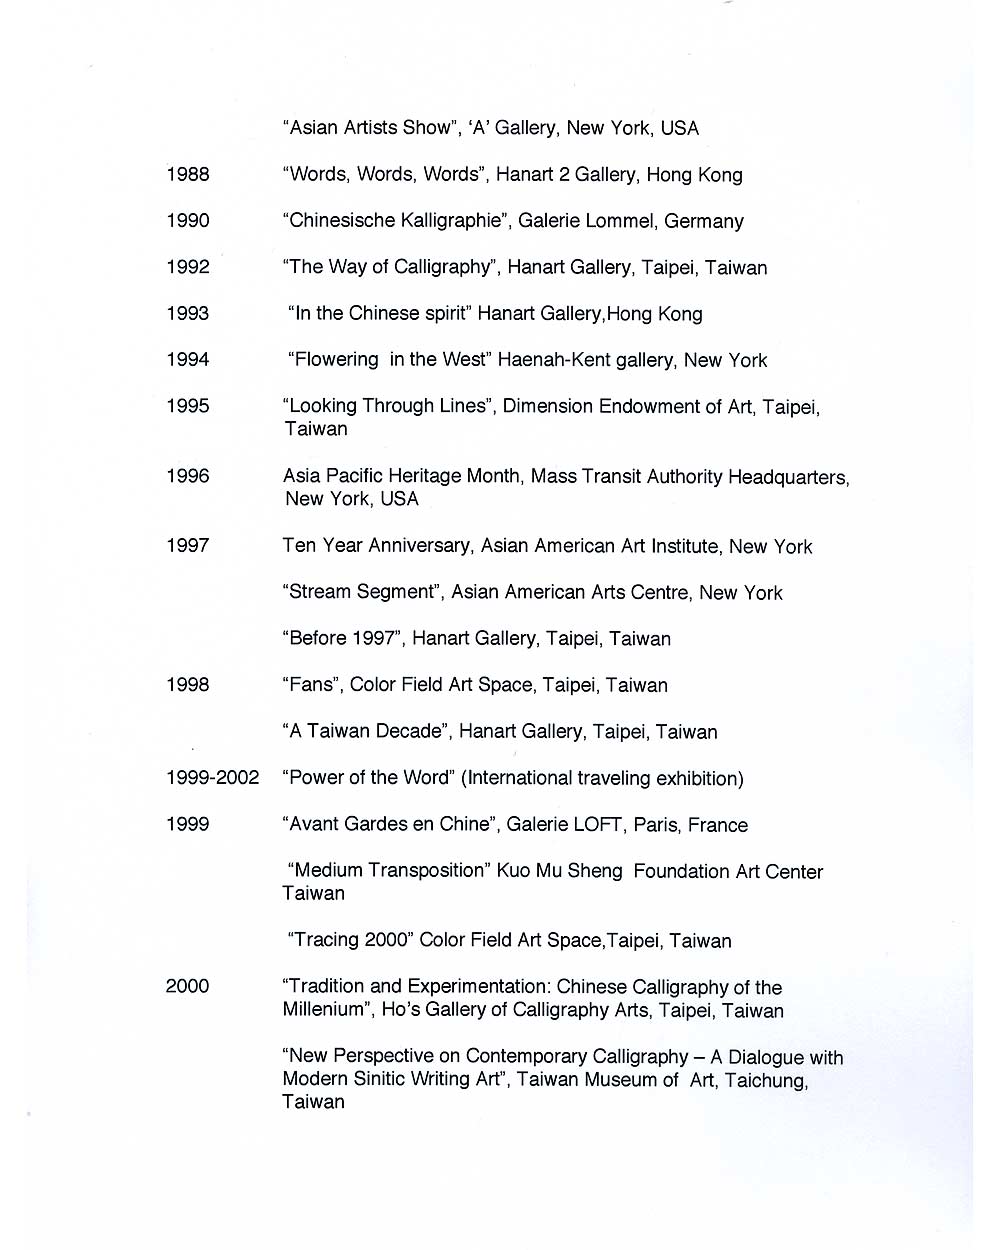 Ming Chip Fung's Resume, pg 3